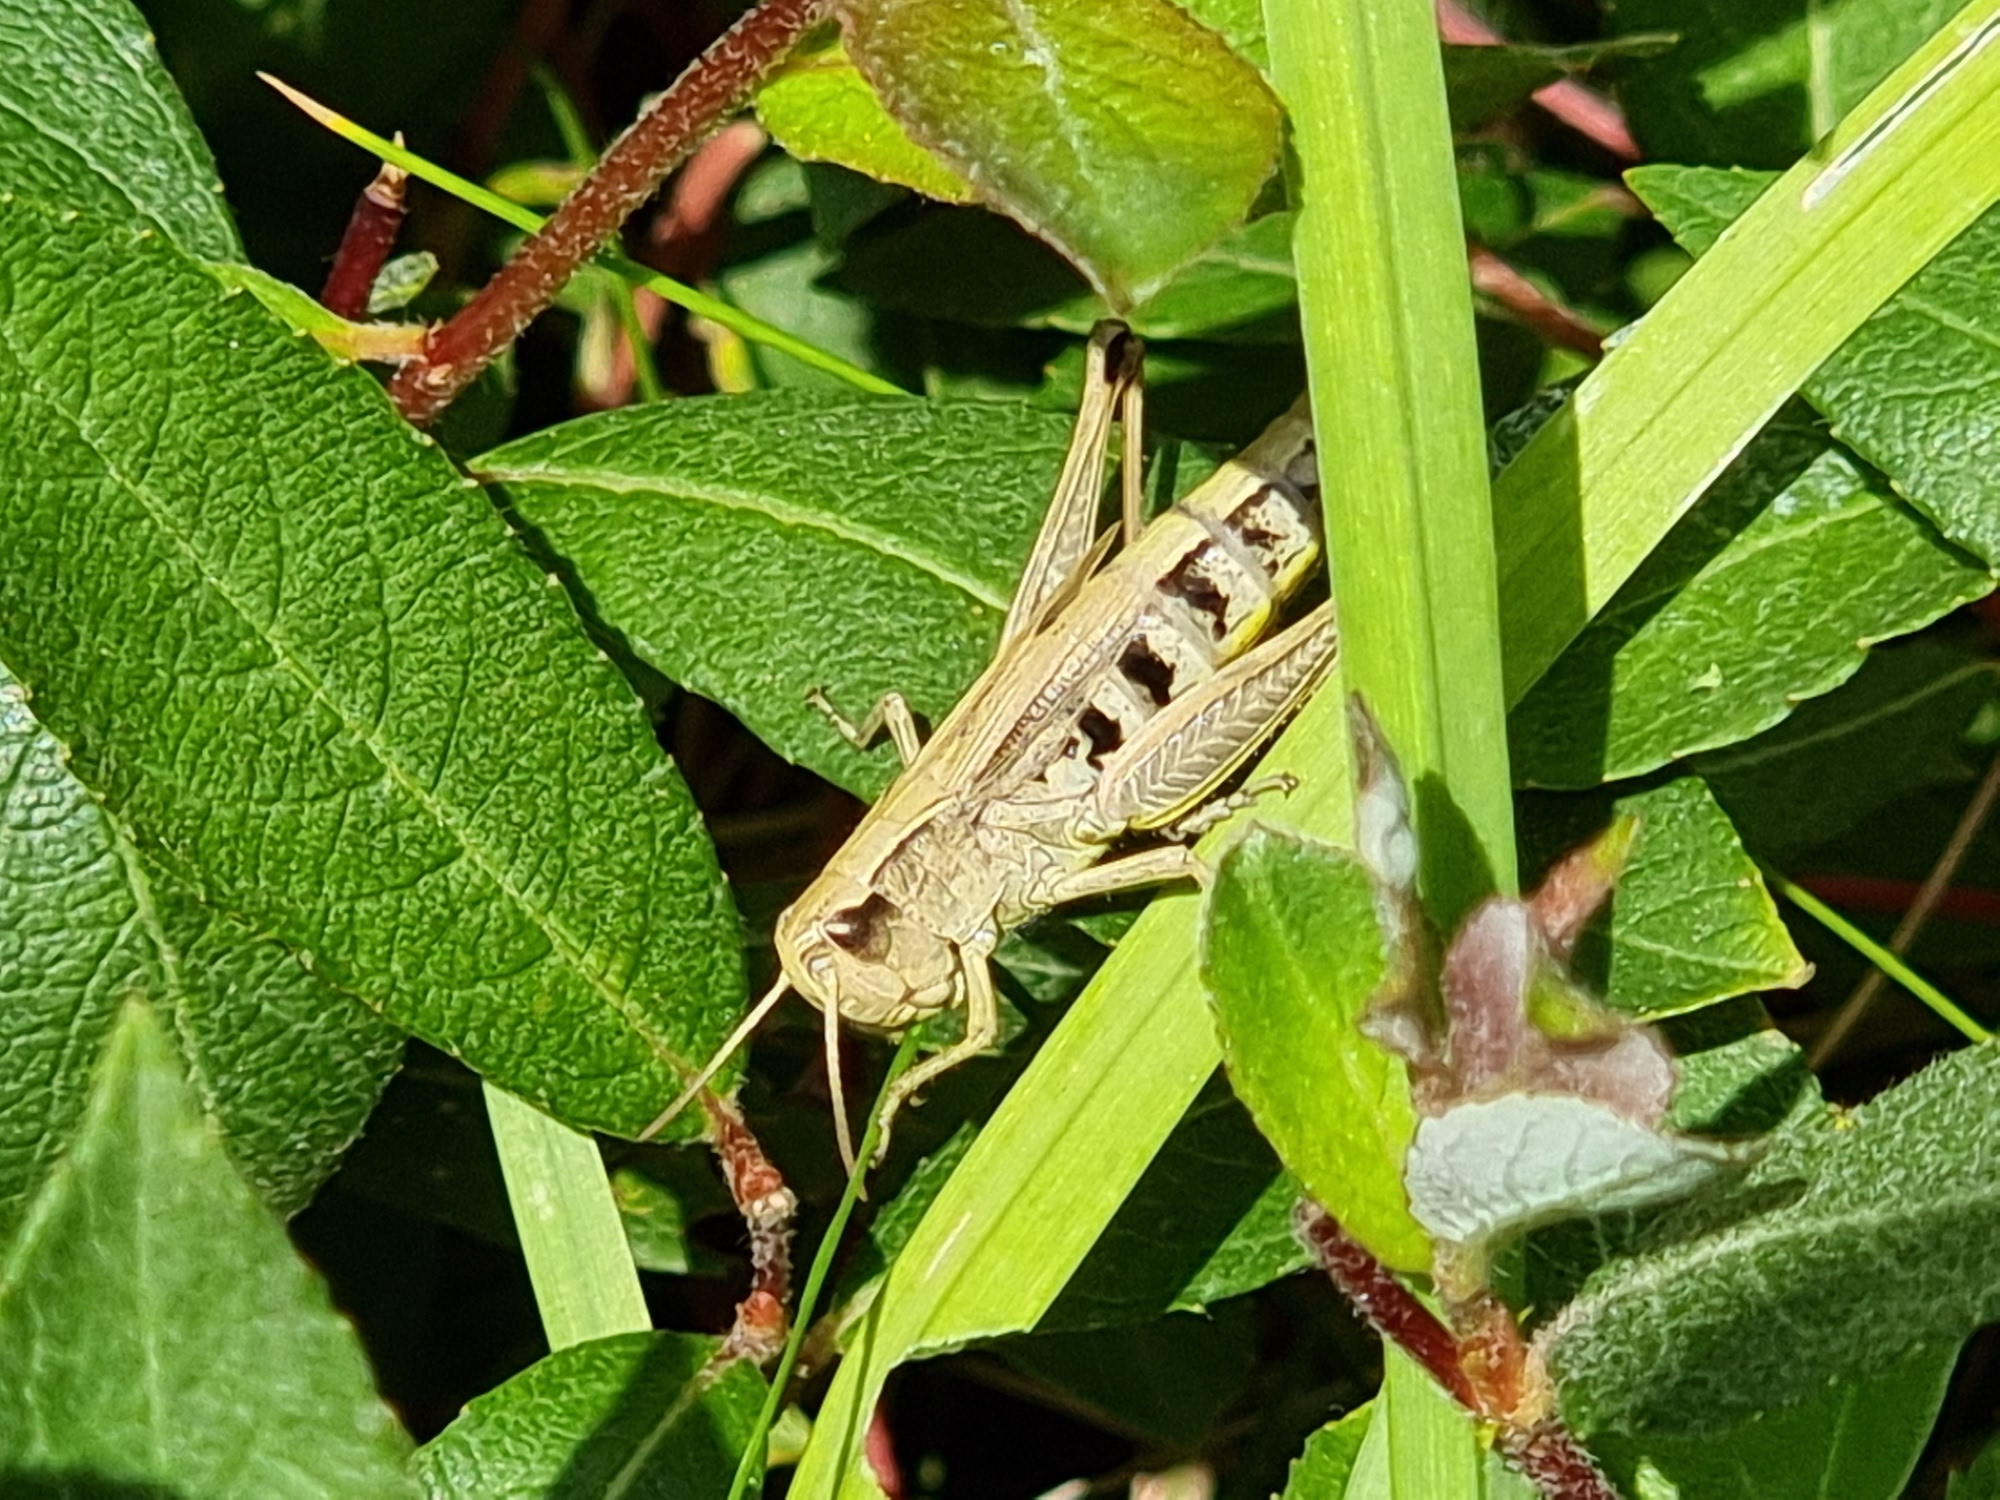 Photo of a grasshopper taken with the Galaxy S21 Ultra.